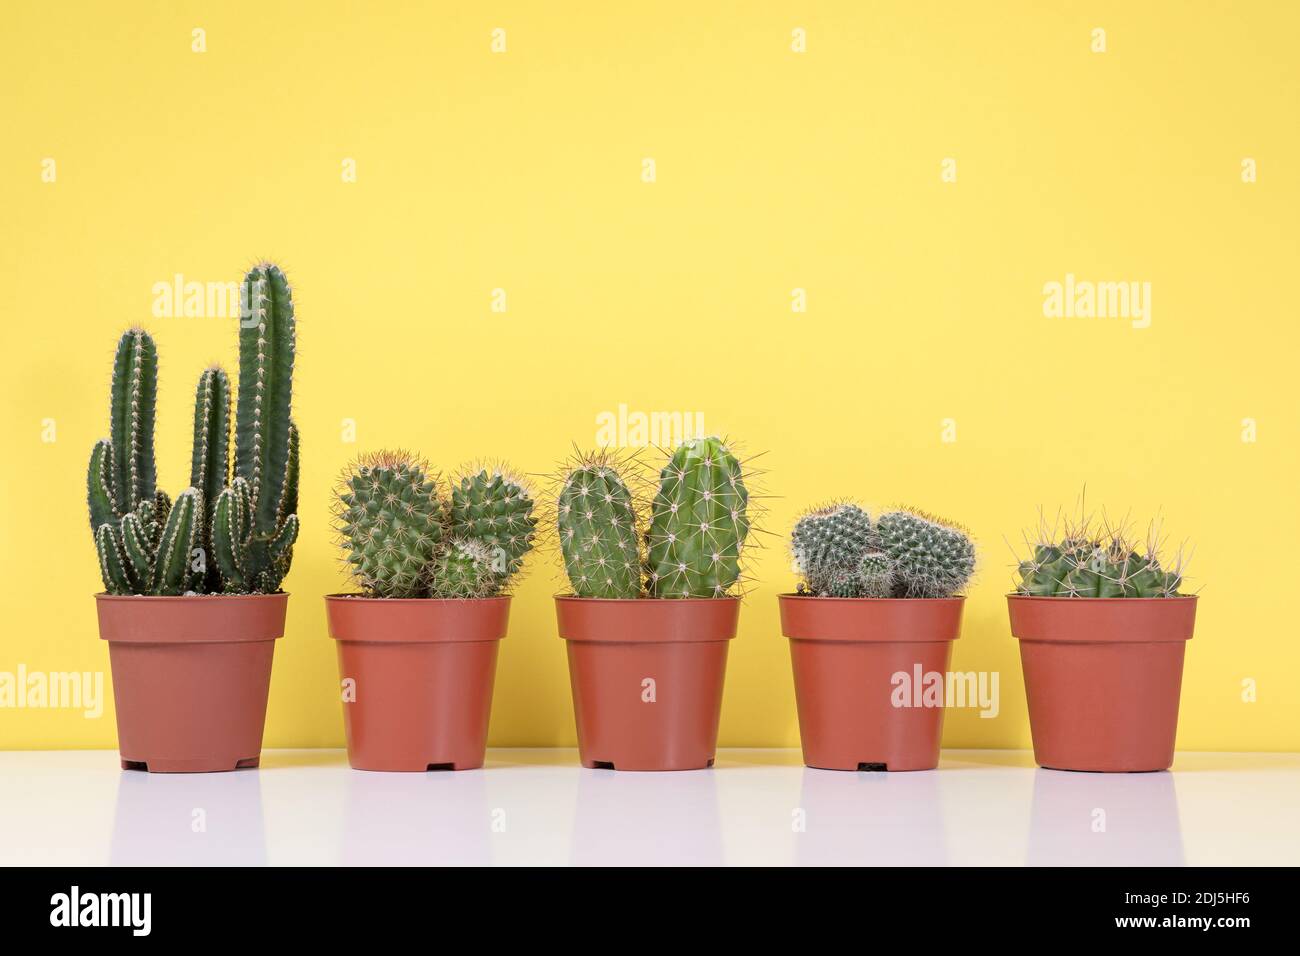 Group of various indoor cactus and succulent plants in pots Stock Photo